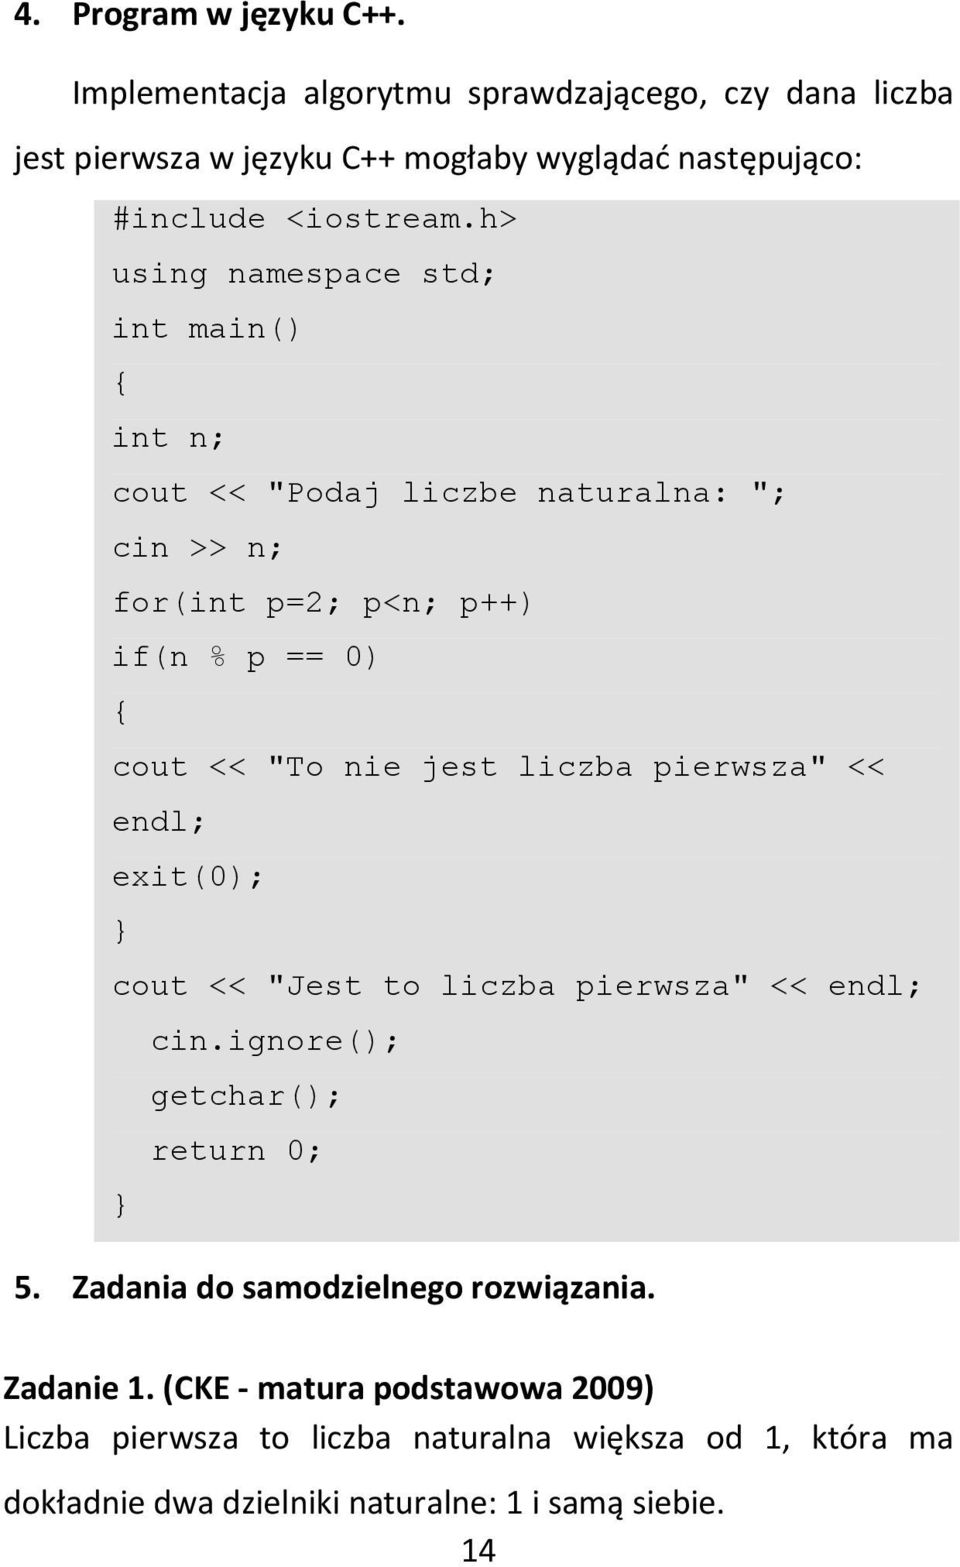 h> using namespace std; int main() { int n; cout << "Podaj liczbe naturalna: "; cin >> n; for(int p=2; p<n; p++) if(n % p == 0) { cout << "To nie jest